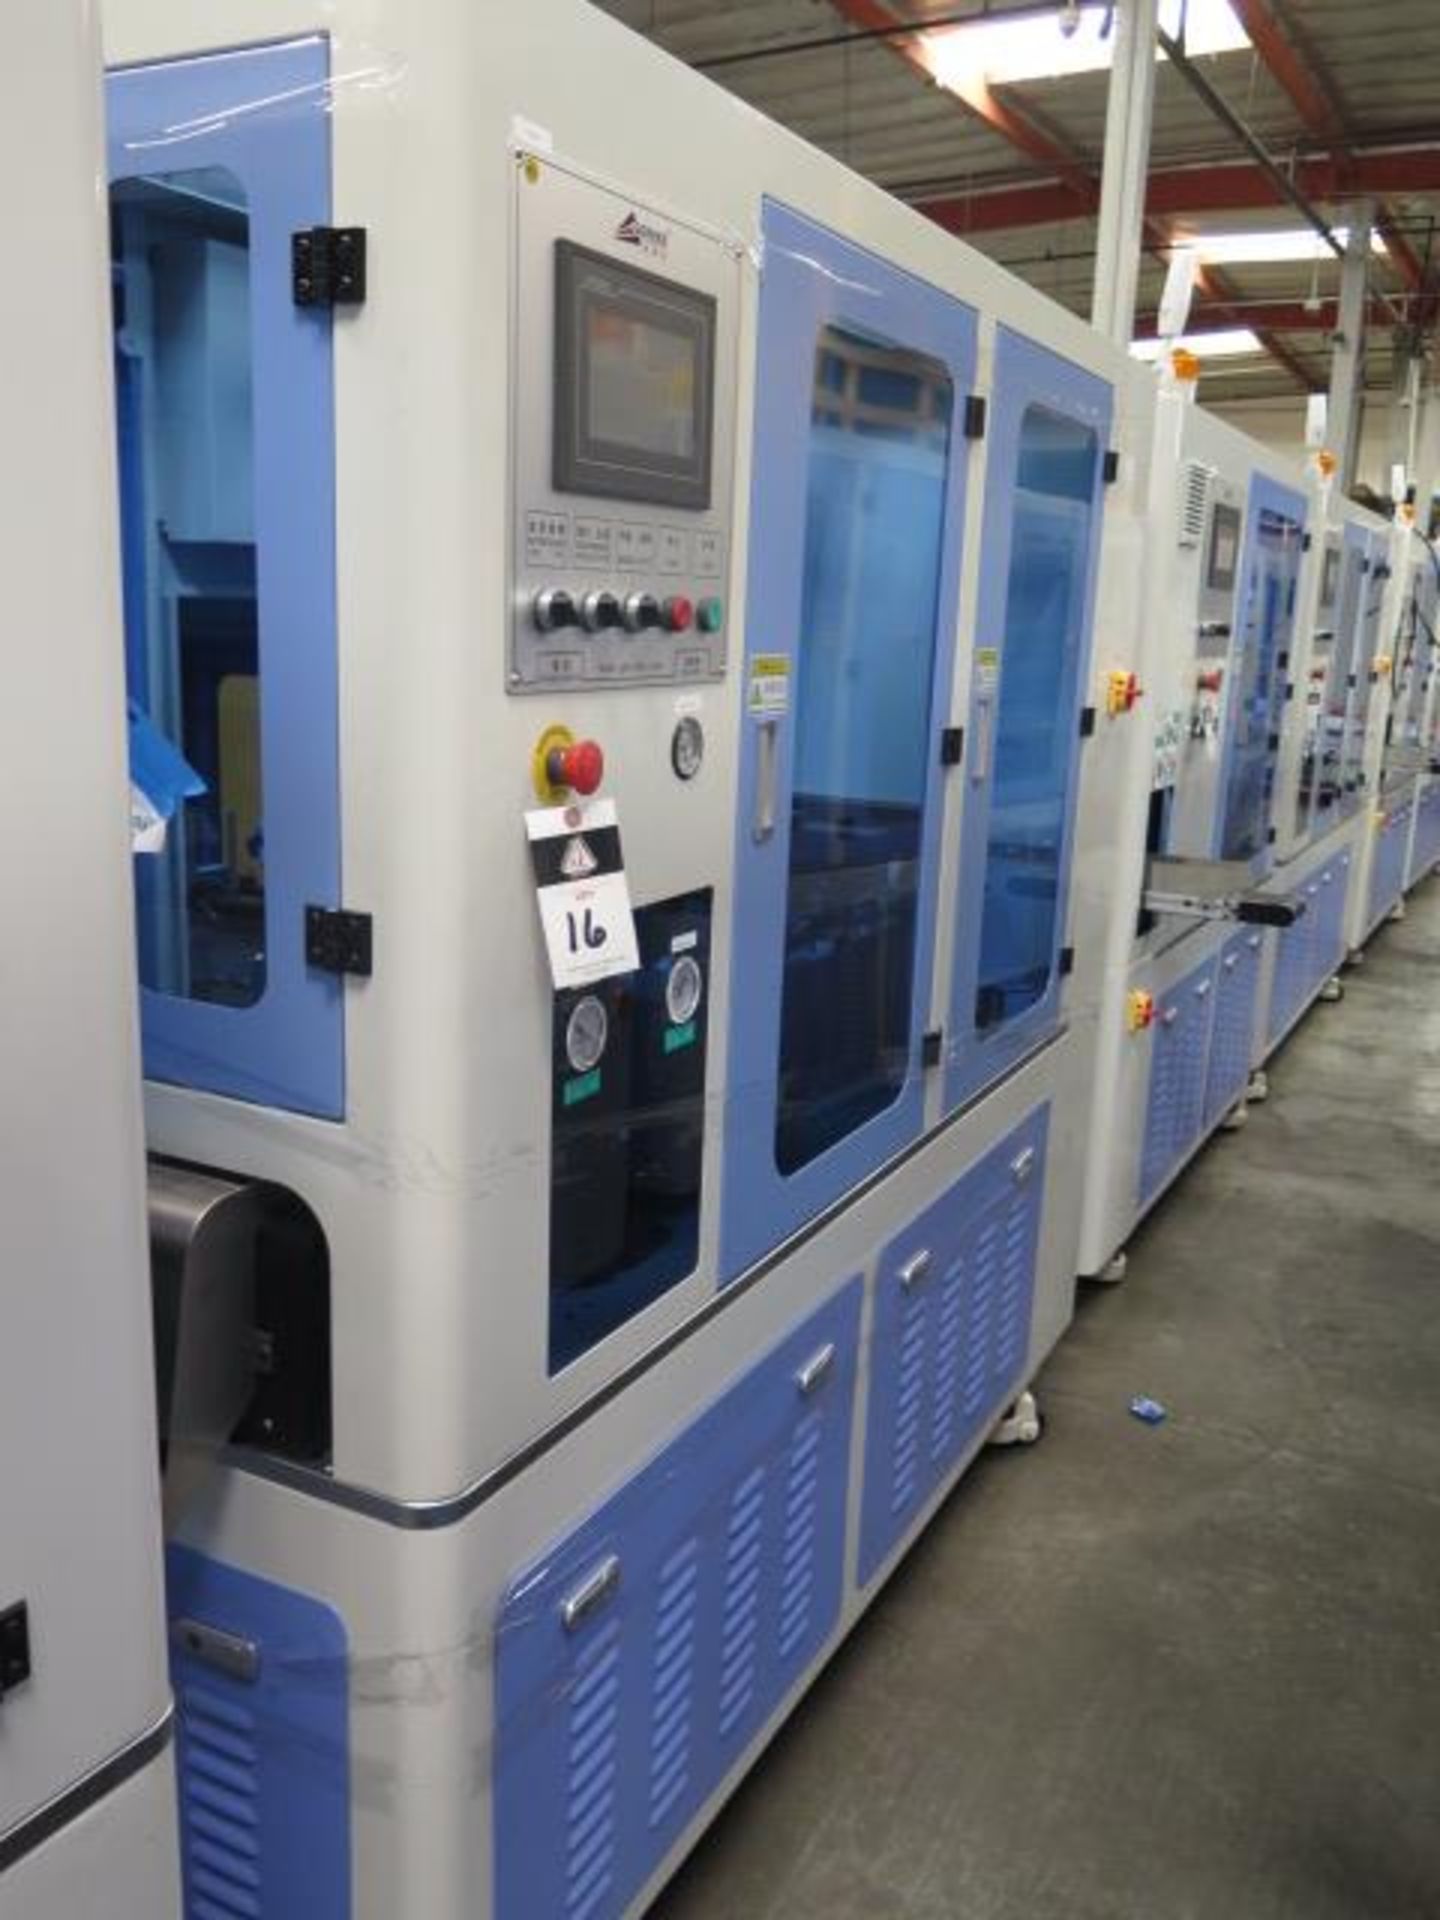 2/2021 Gereke mdl. GRK-TWO1 Cassette Assembly and Packaging Line s/n GRK20210227045, SOLD AS IS - Bild 15 aus 34